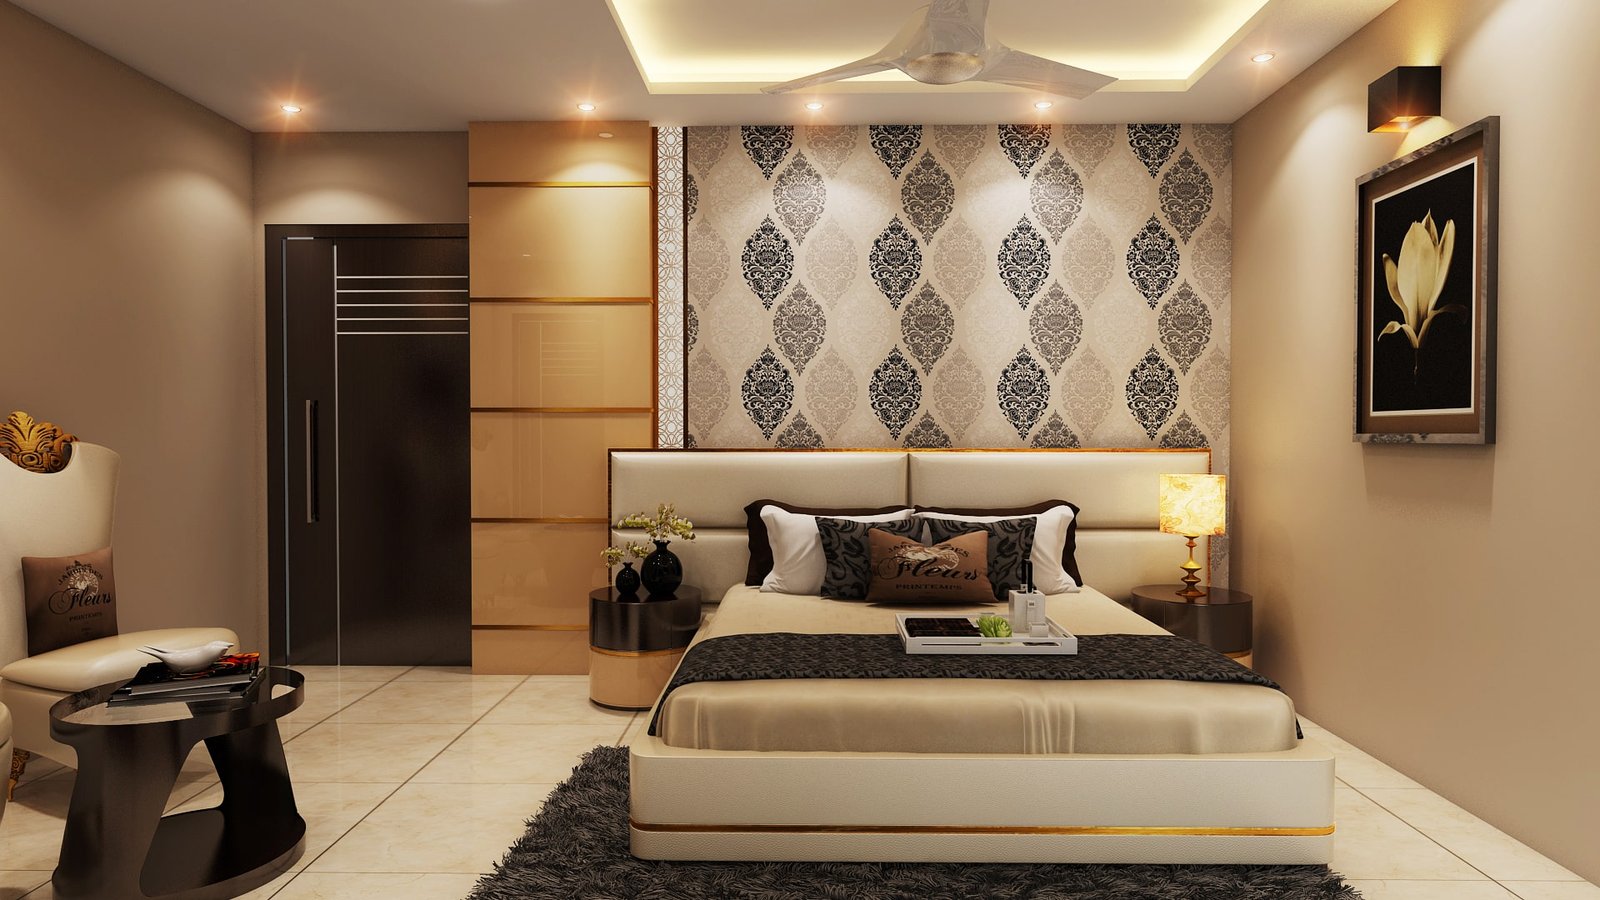 Residence Interior Design by HSAA